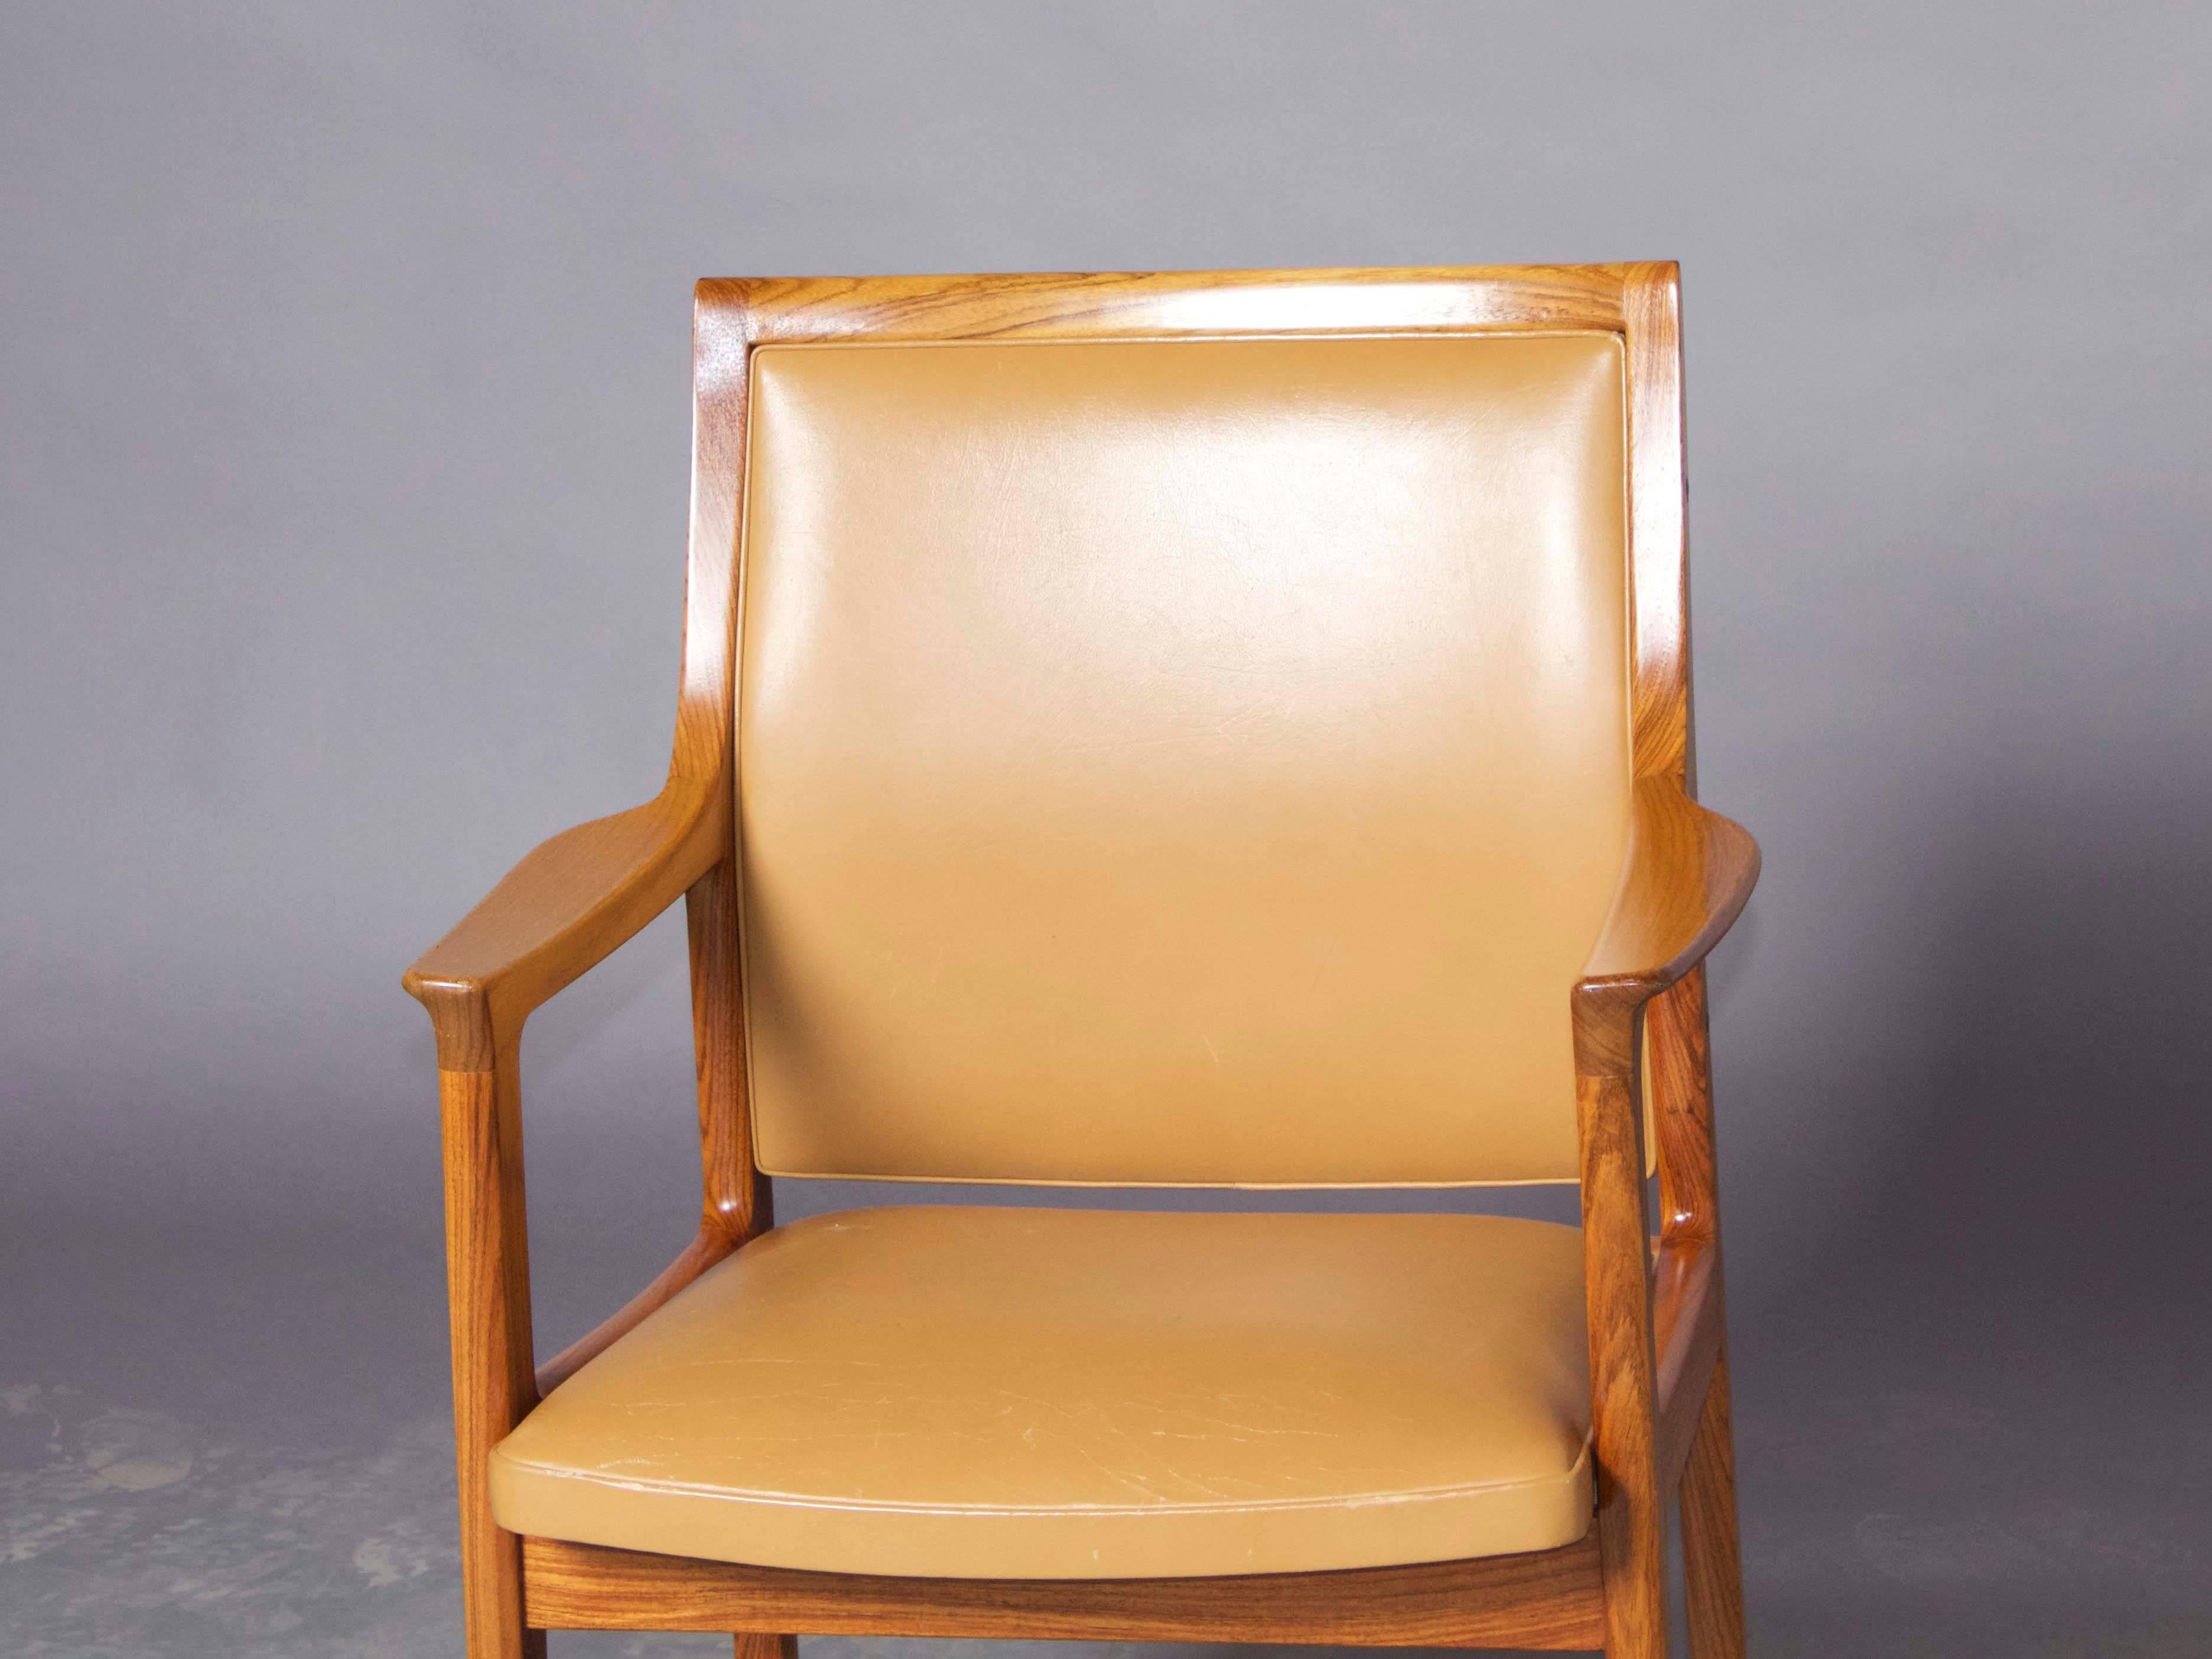 Vintage 1960s Leather Occasional Chairs by Torbjorn Afdal

These are afine all original pair of armchairs by the Norwegian designer Torbjørn Afdal. Featuring a well cared for butterscotch leather upholstery and a light colored rosewood frame. Ready